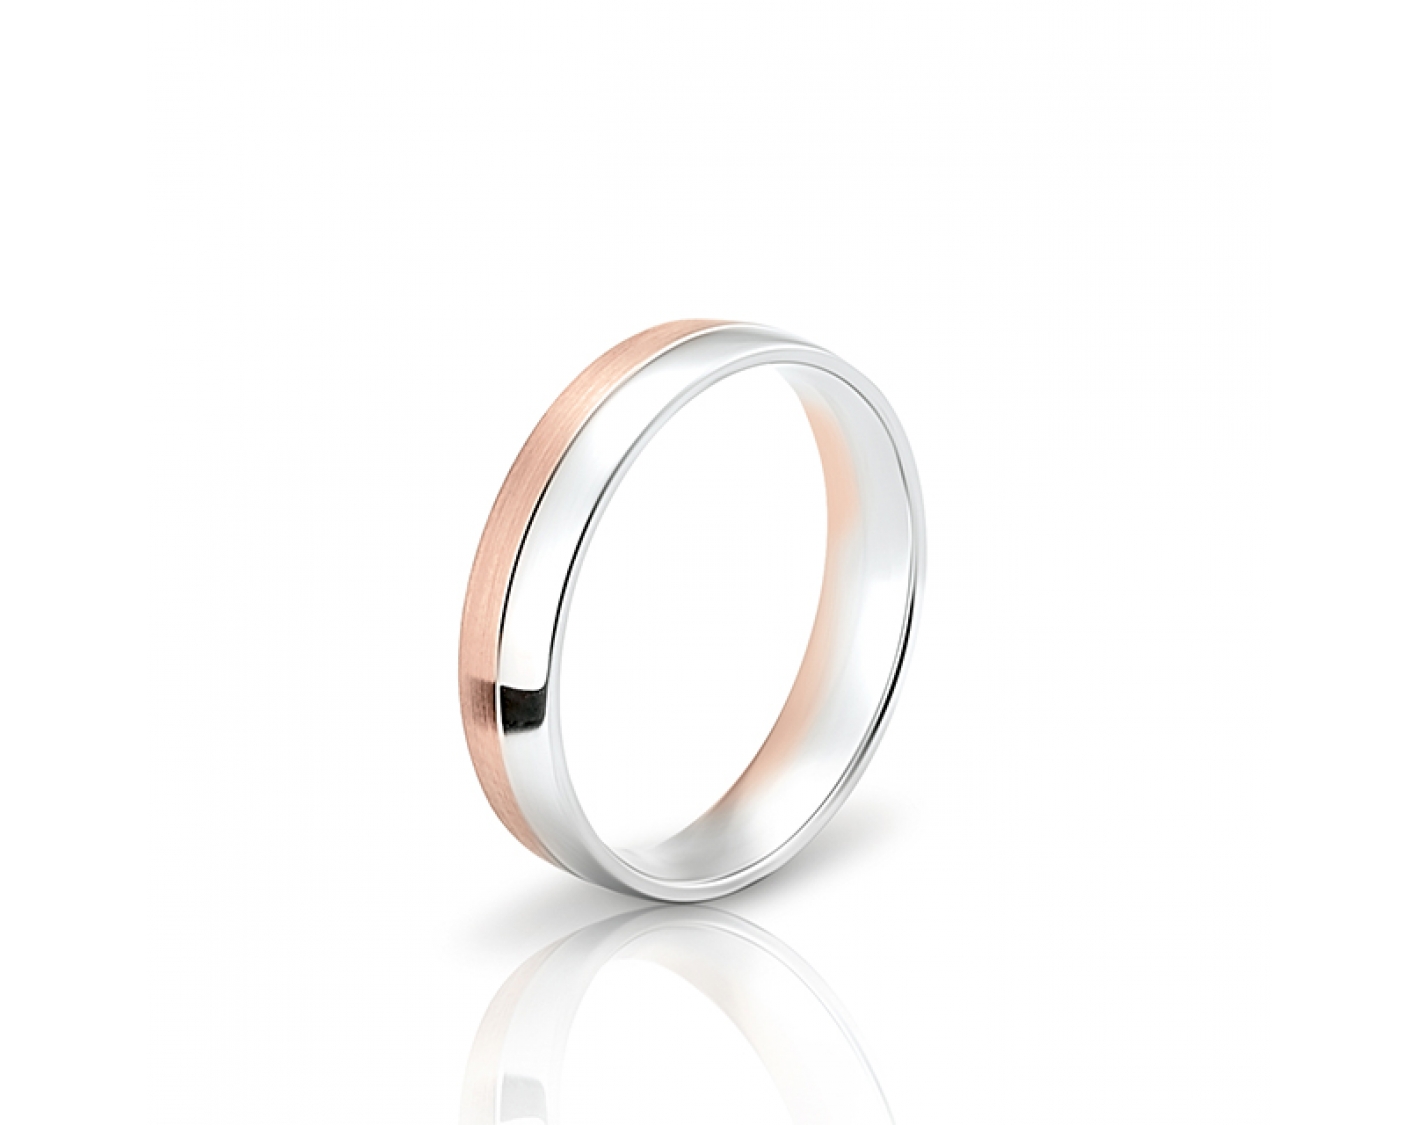 dual-tone 4,5mm two-toned* wedding band Photos & images